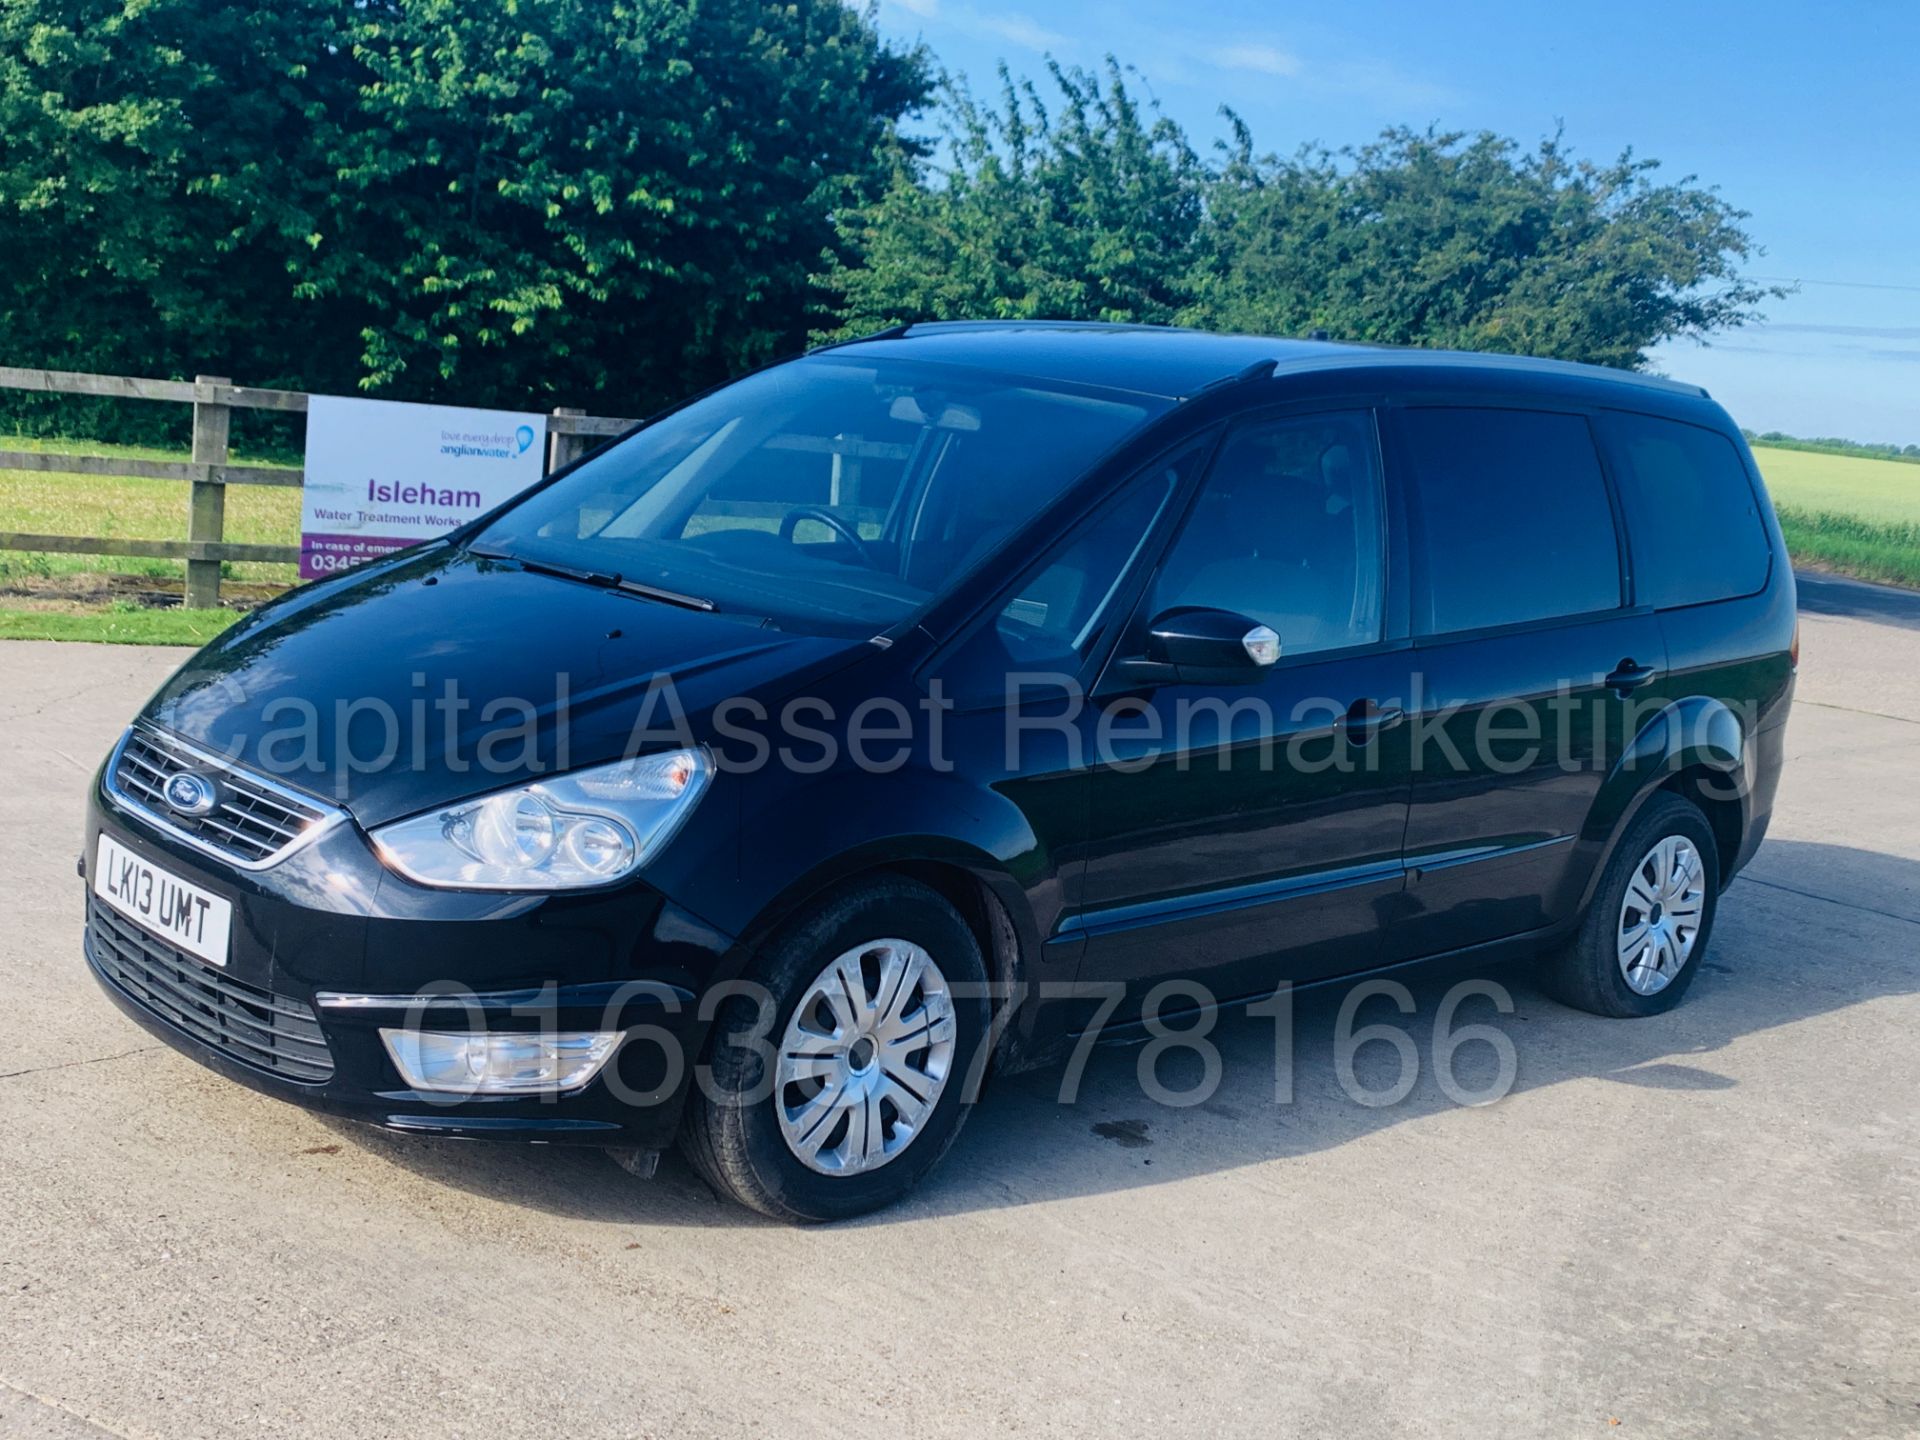 (ON SALE) FORD GALAXY *ZETEC* 7 SEATER MPV (2013) '2.0 TDCI - POWER SHIFT' (NO VAT - SAVE 20%) - Image 3 of 31